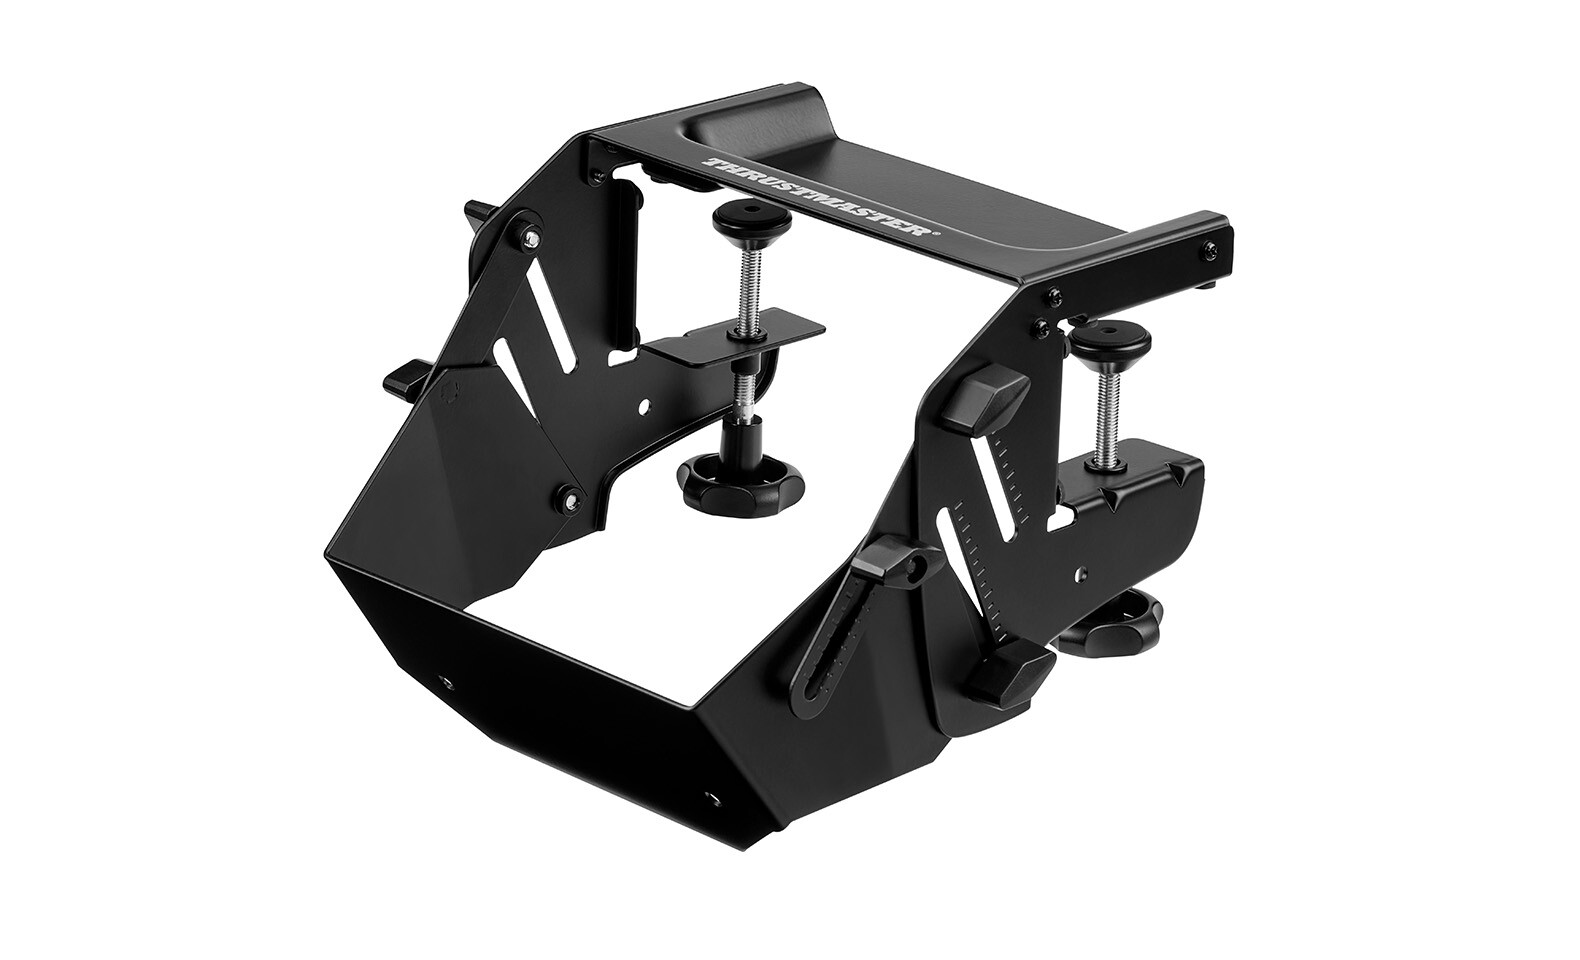 Thrustmaster Introduces its SimTask Steering Kit - Designed for